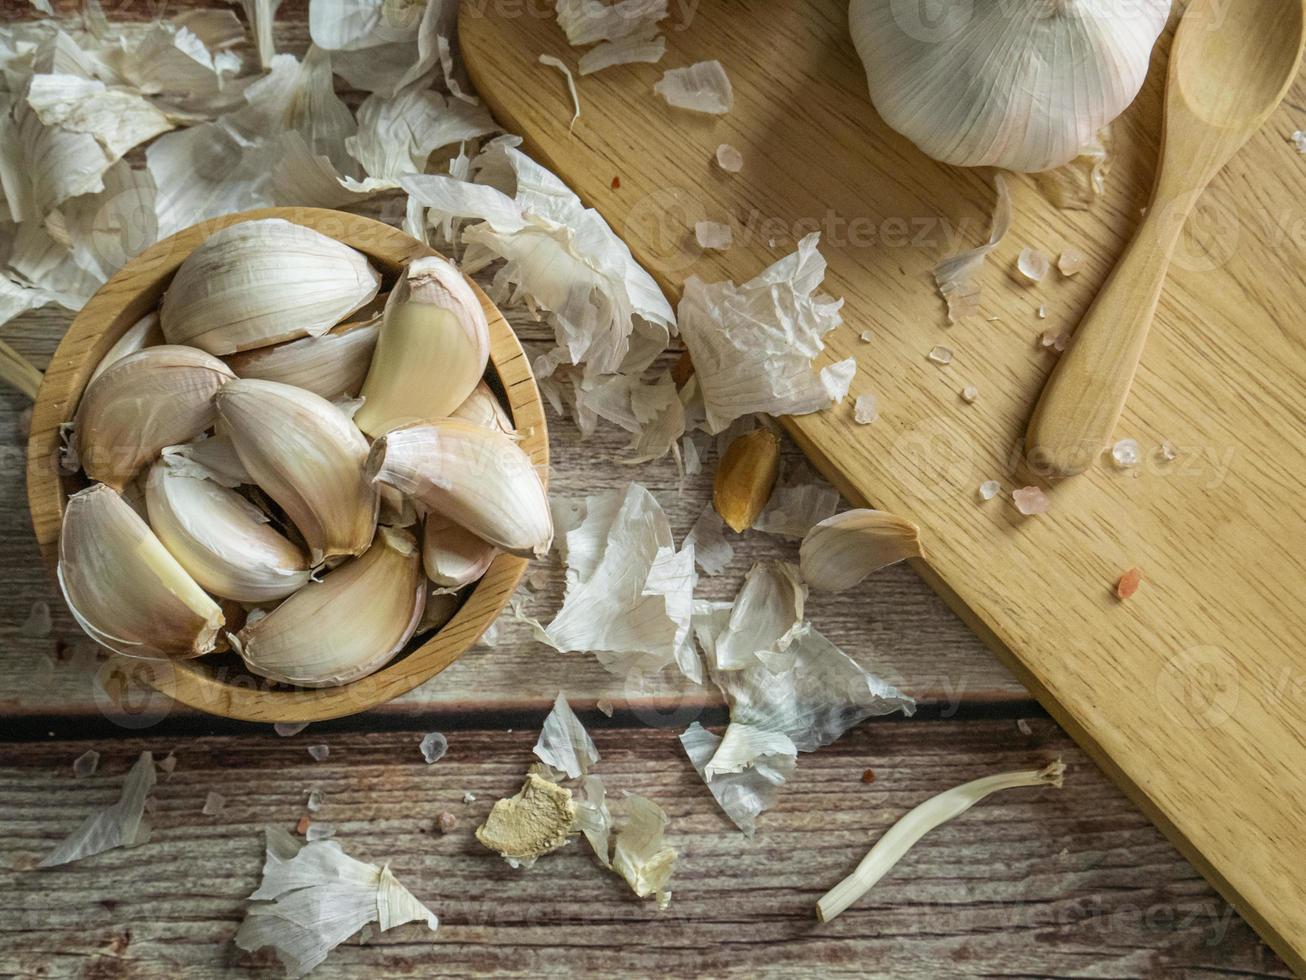 The garlic on wood table for food or cooking concept. photo